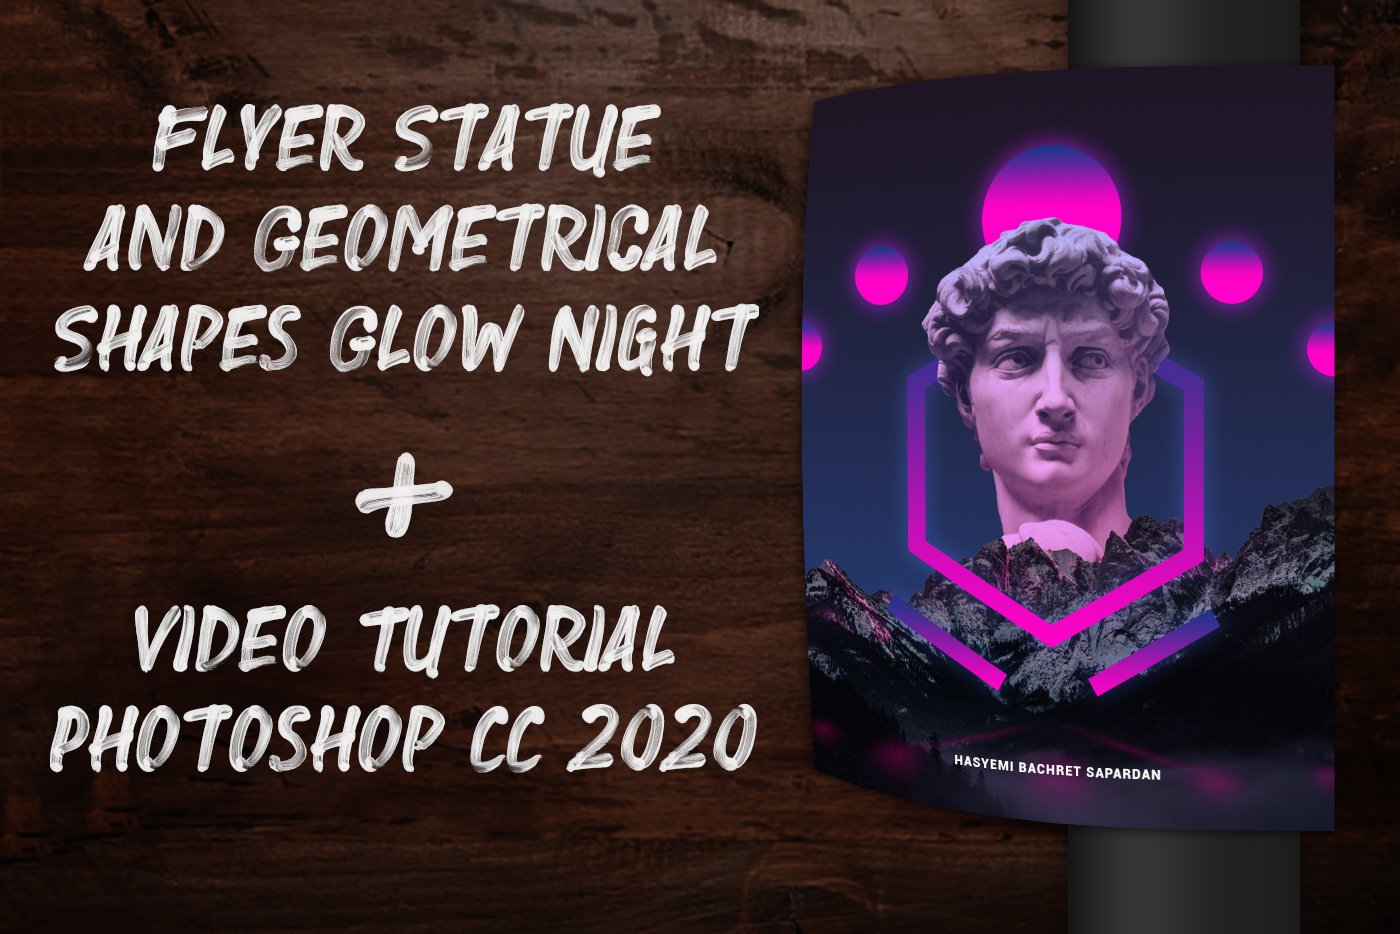 Flyer Statue and Geometrical Shapes Glow Night + Video Tutorial